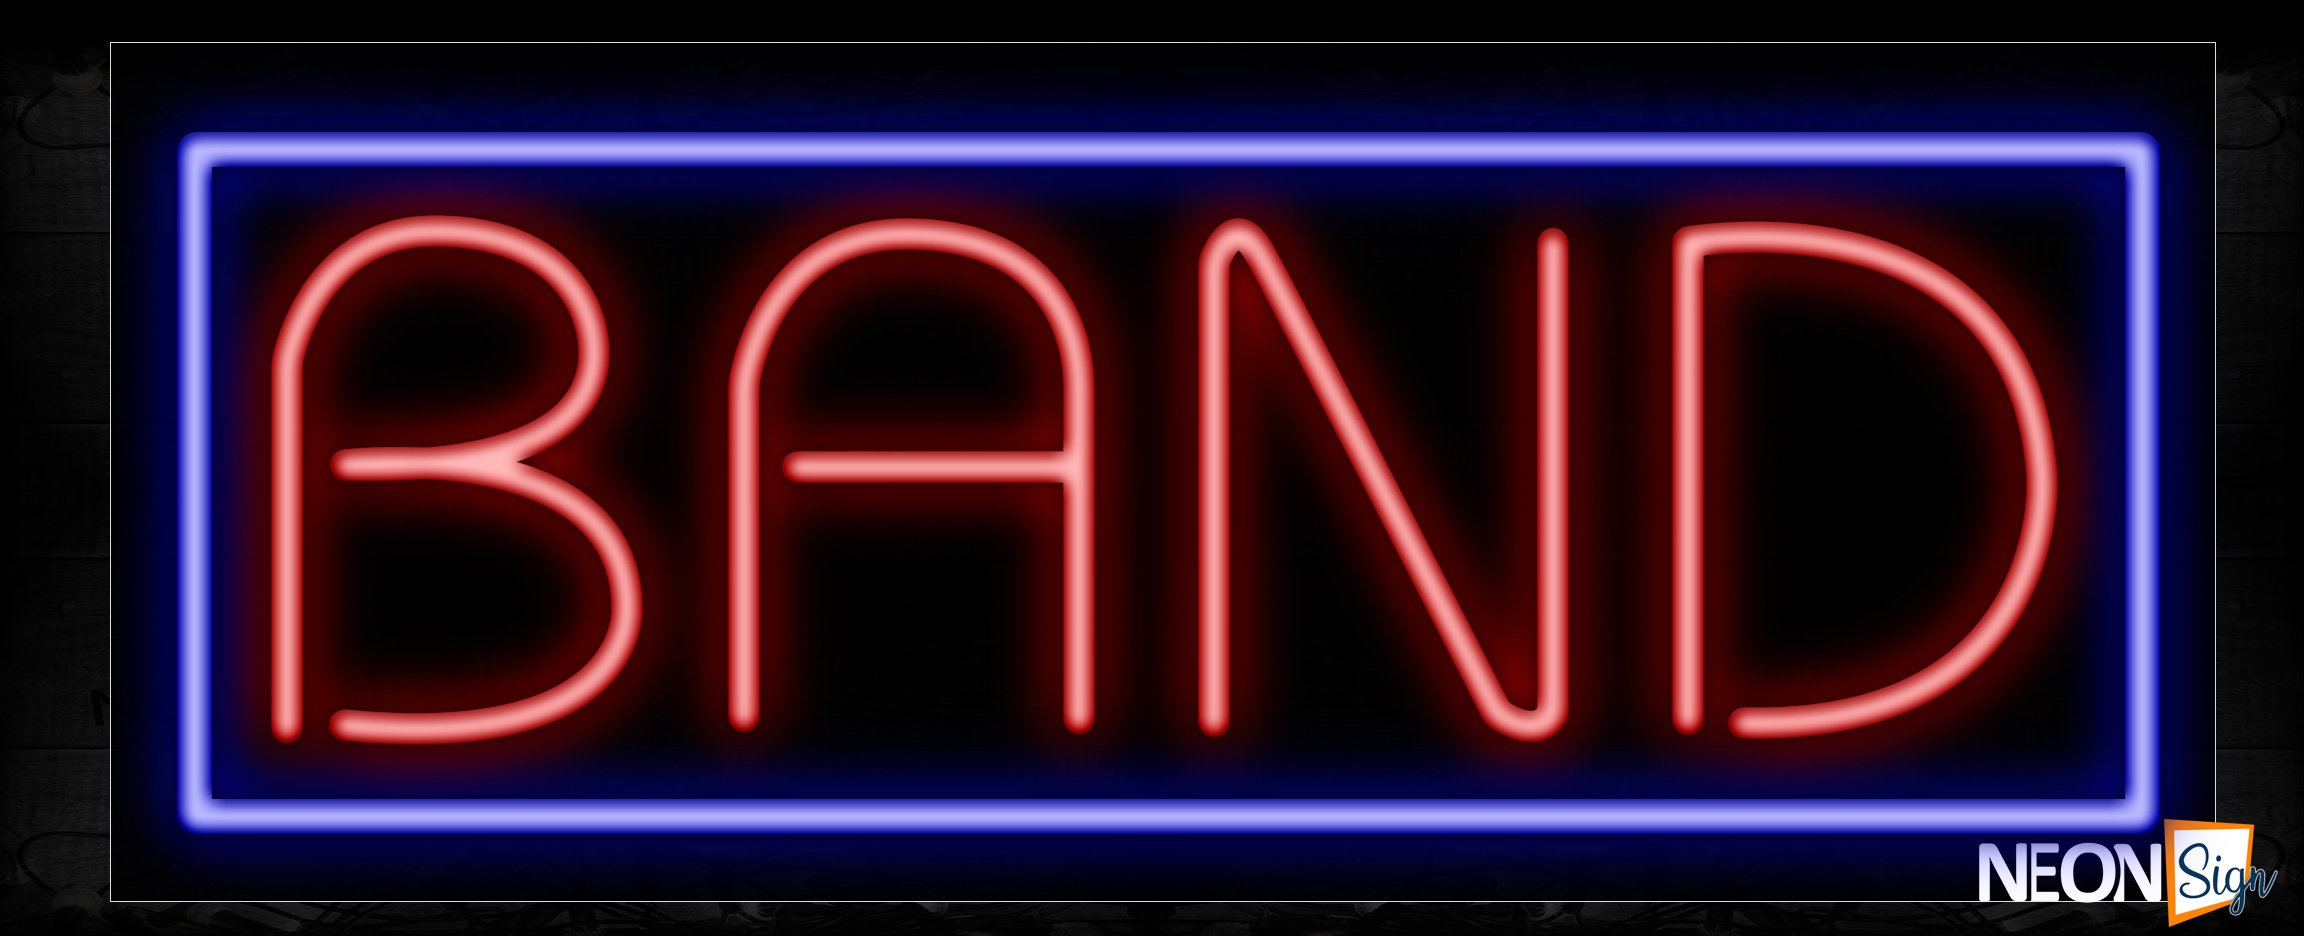 Image of 11358 Band in red with blue border Neon Sign_13x32 Black Backing